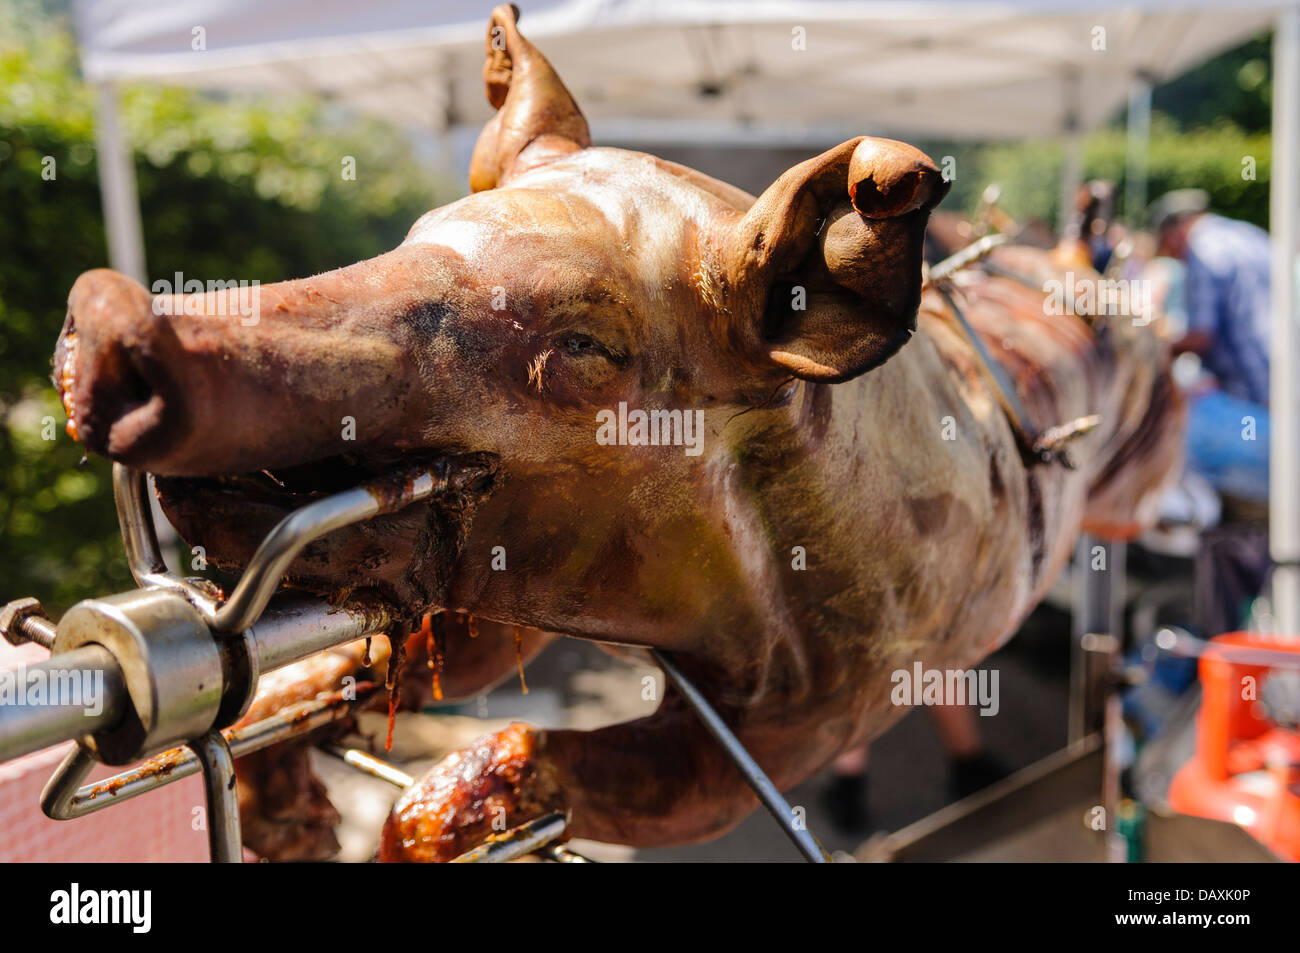 Hog Roast on a spit after being cooked Stock Photo